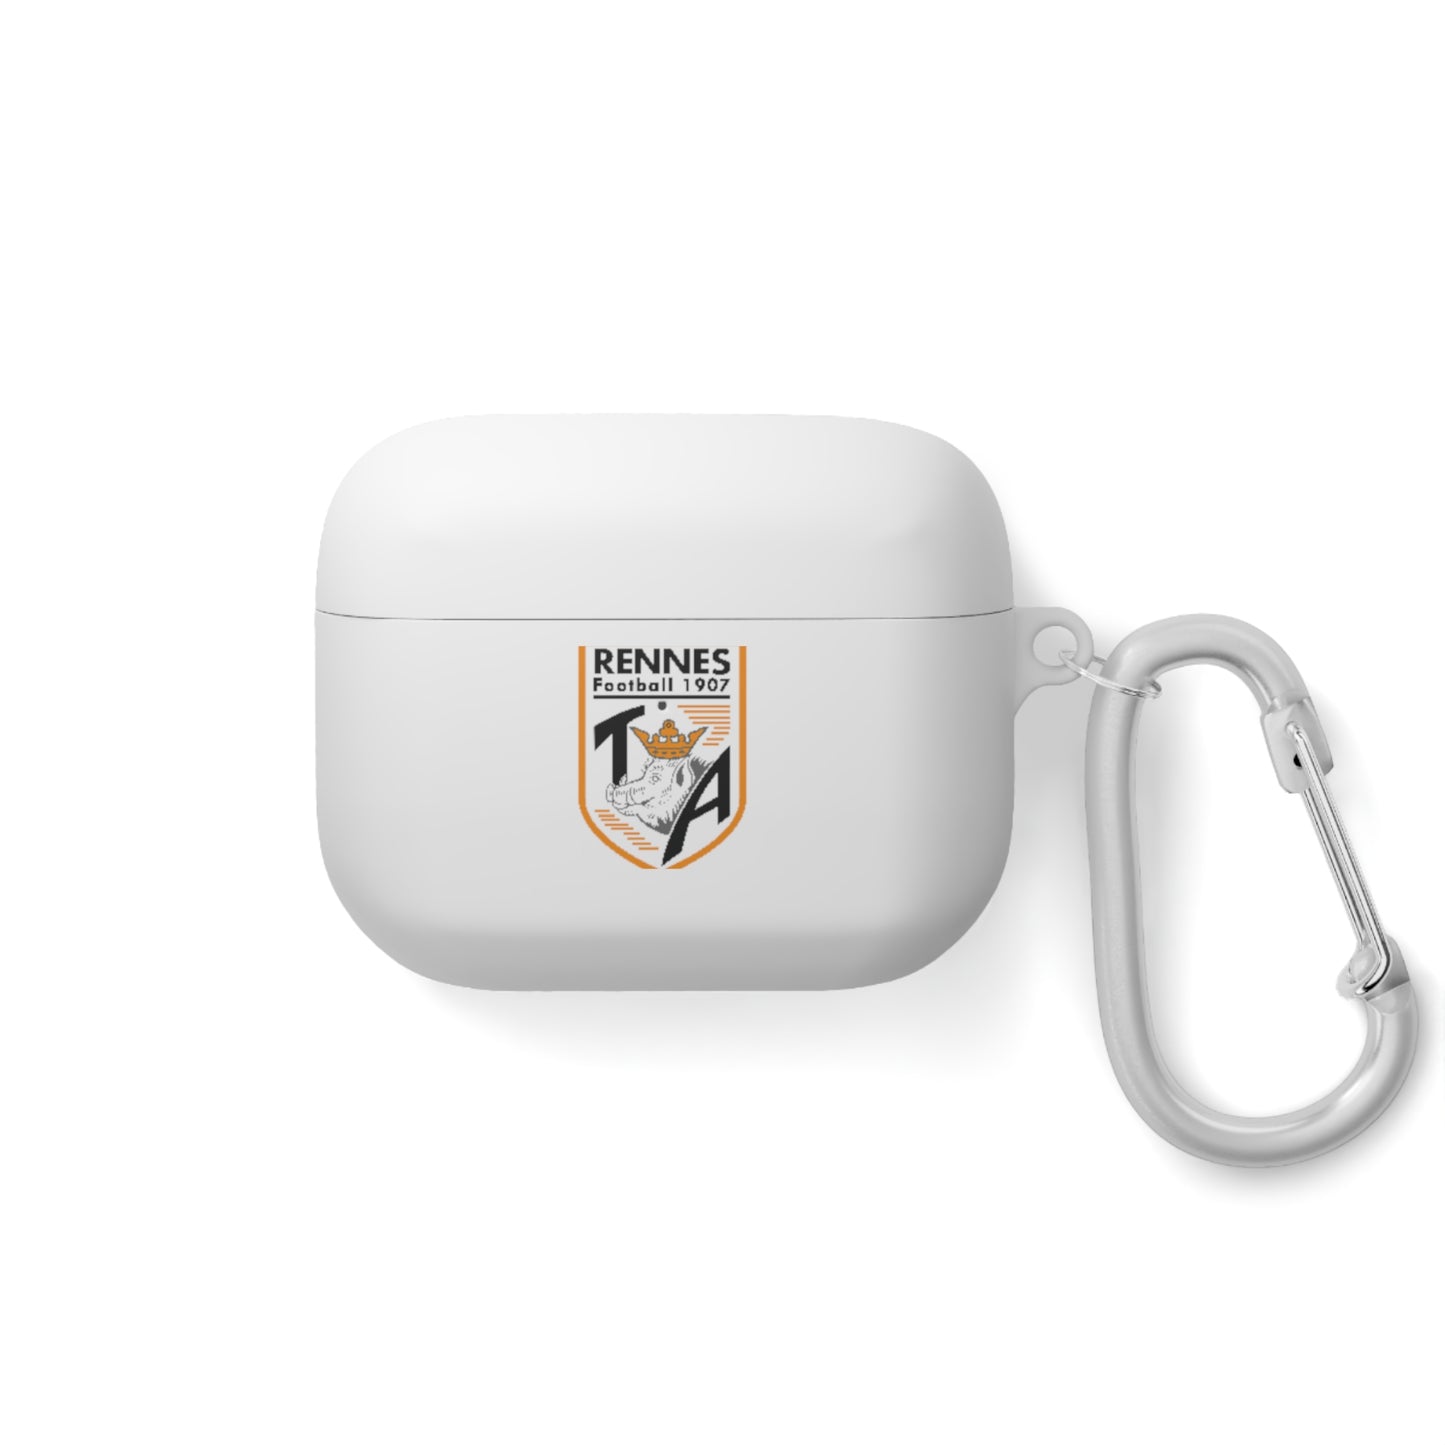 La Tour Auvergne Rennes AirPods and AirPods Pro Case Cover